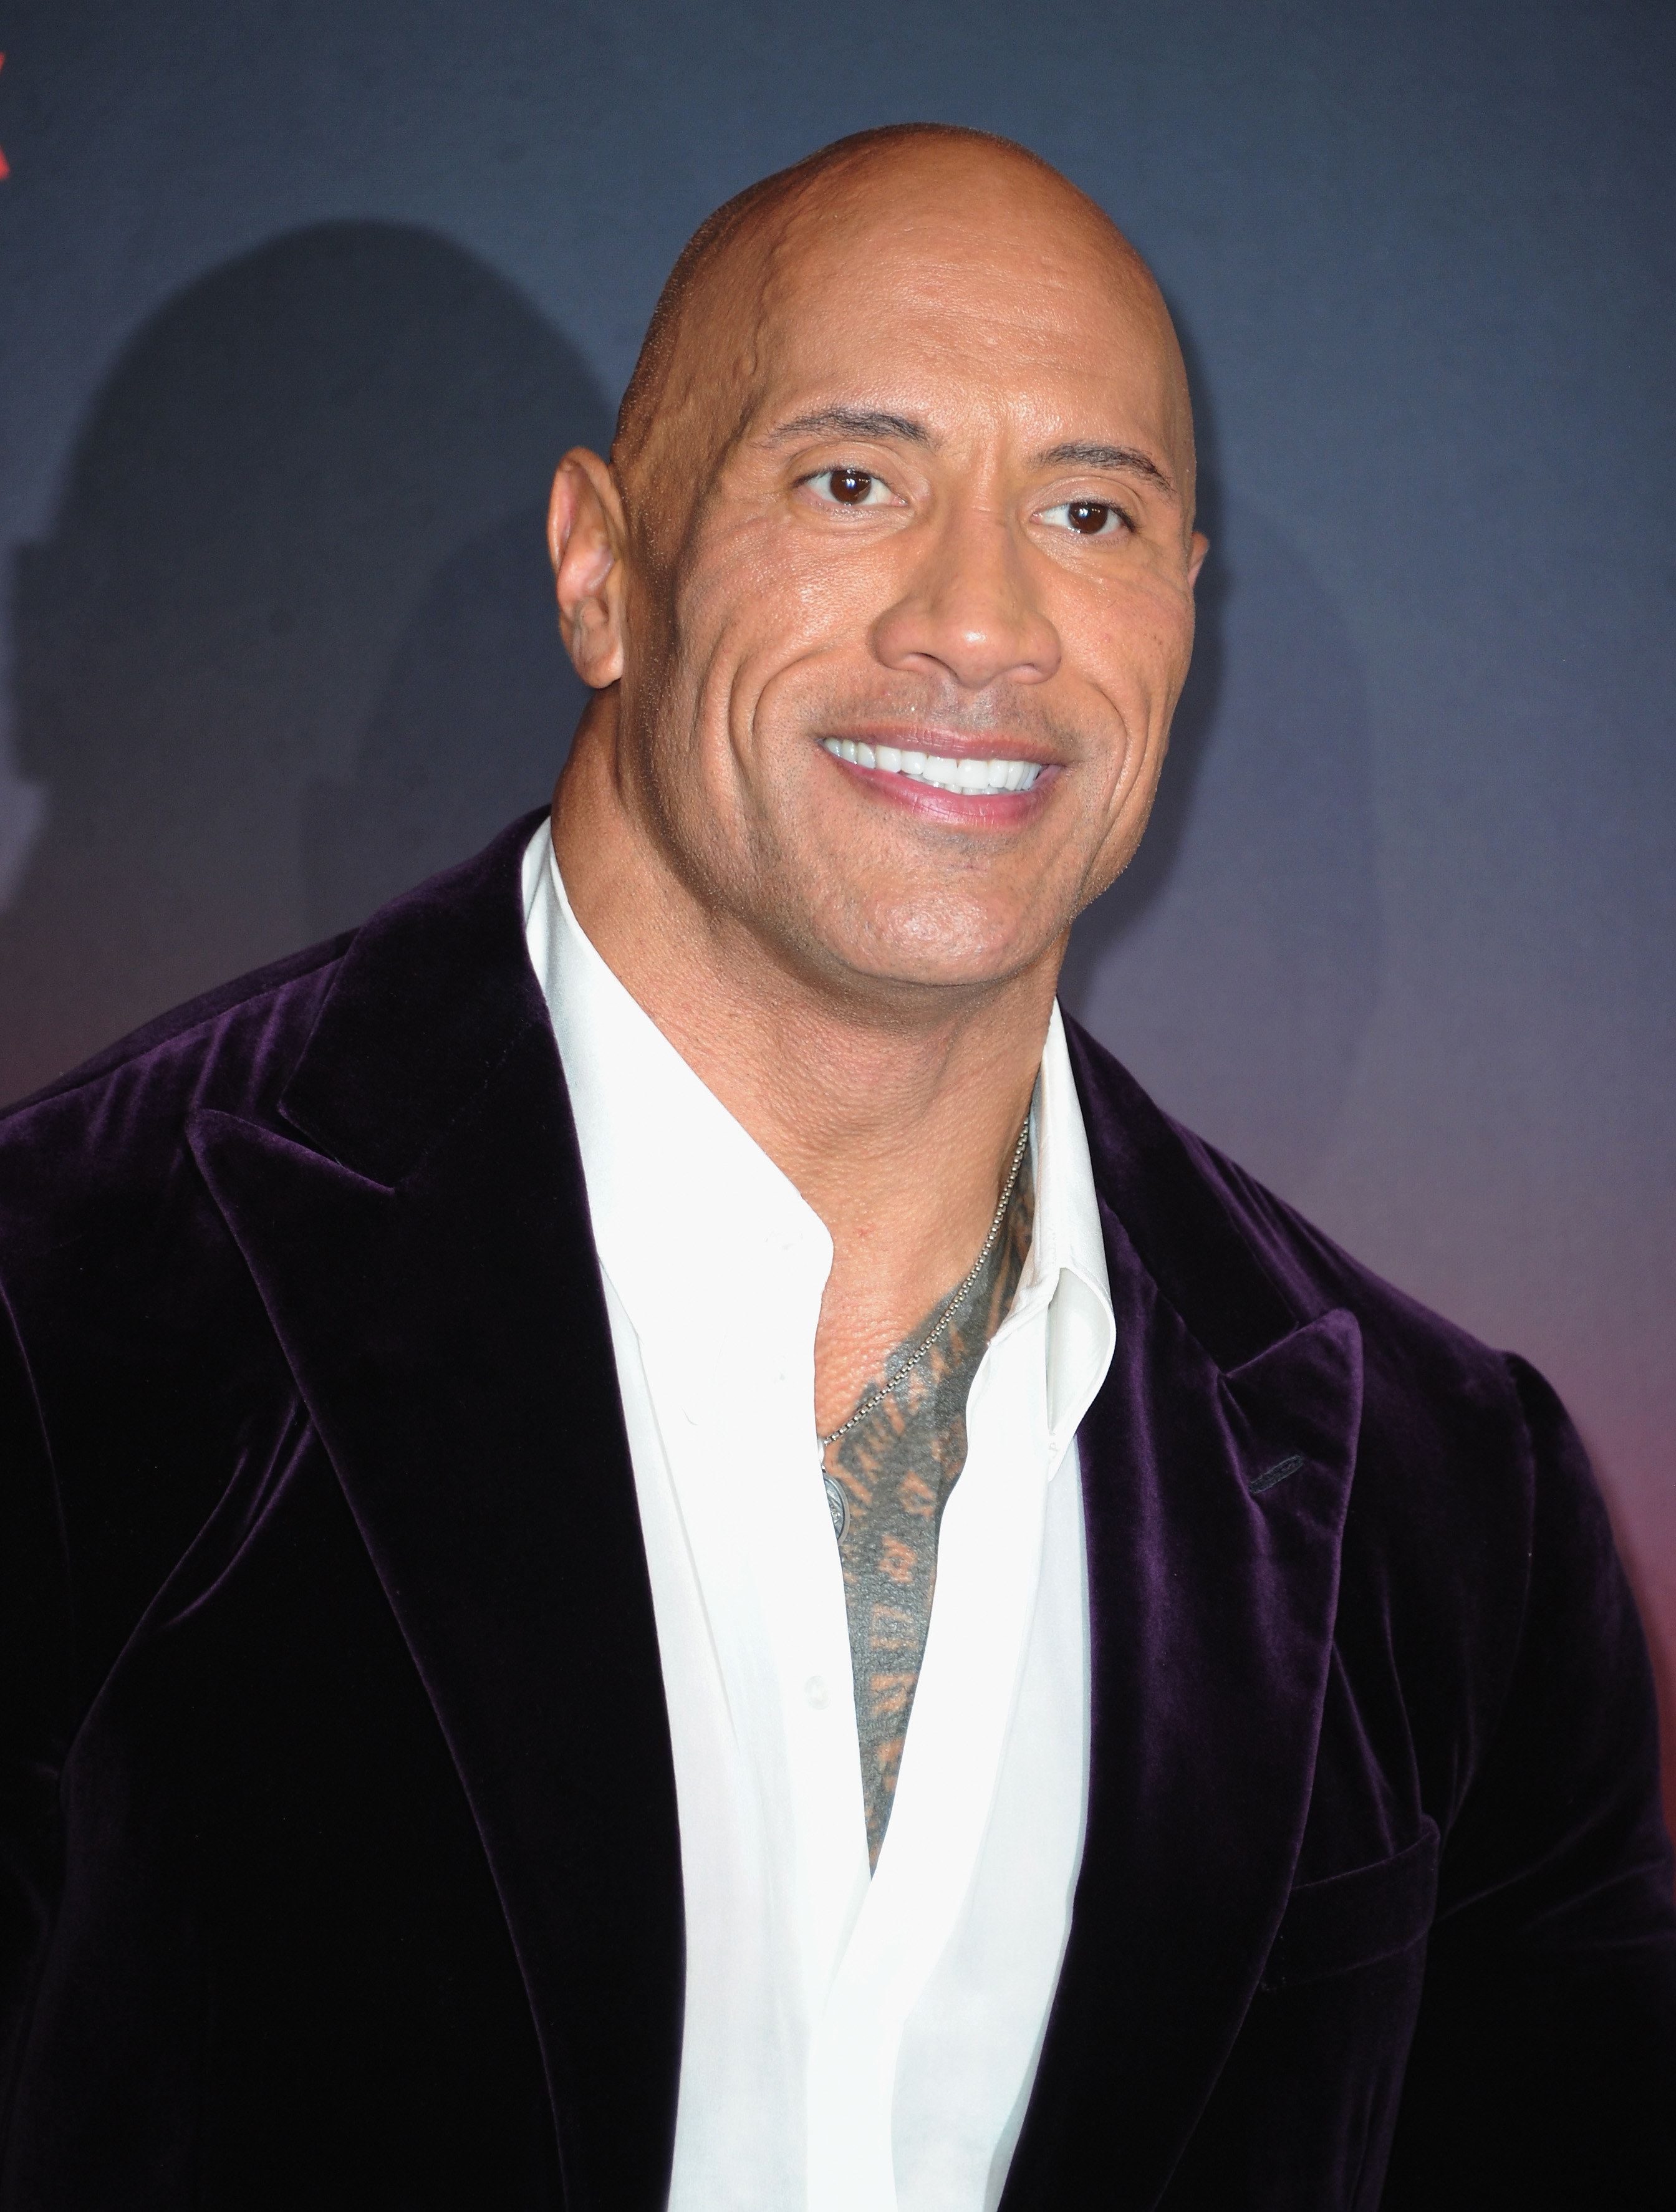 Dwayne Johnson smiles while wearing a suit